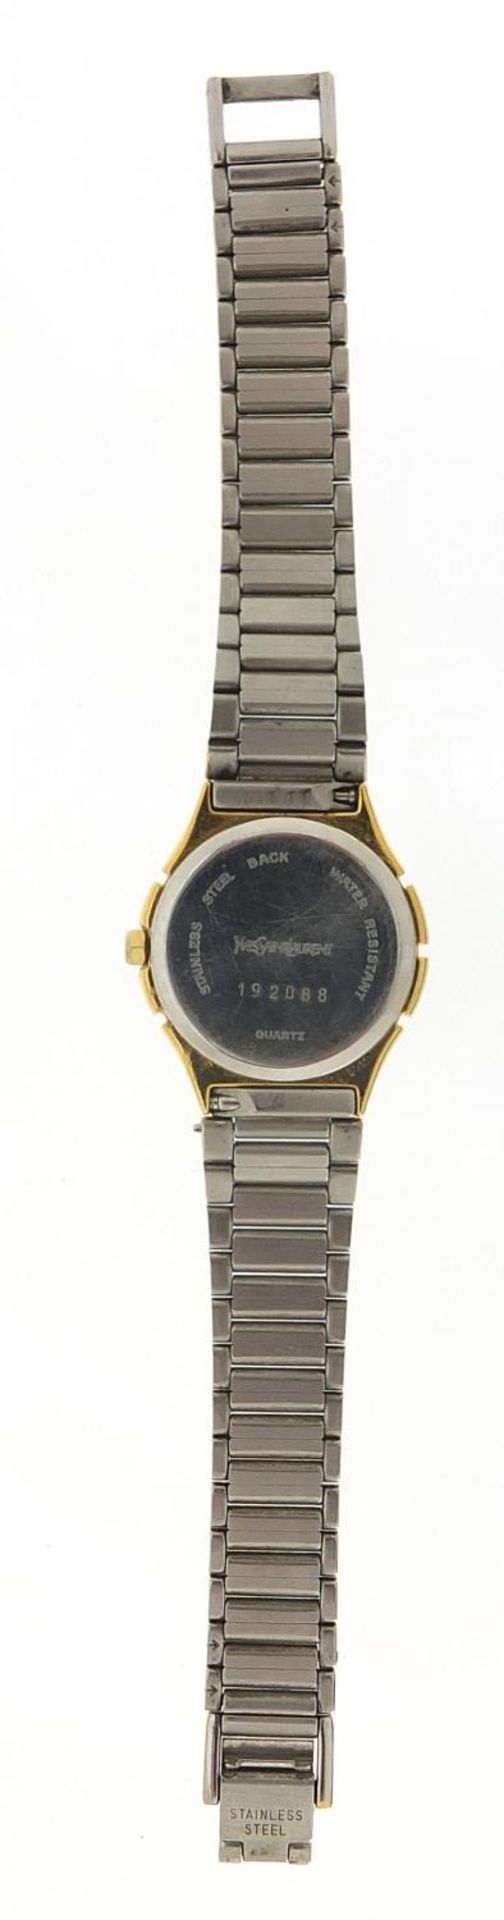 Yves St. Laurent, ladies quartz wristwatch numbered 192088, 24mm in diameter :For Further - Image 6 of 6